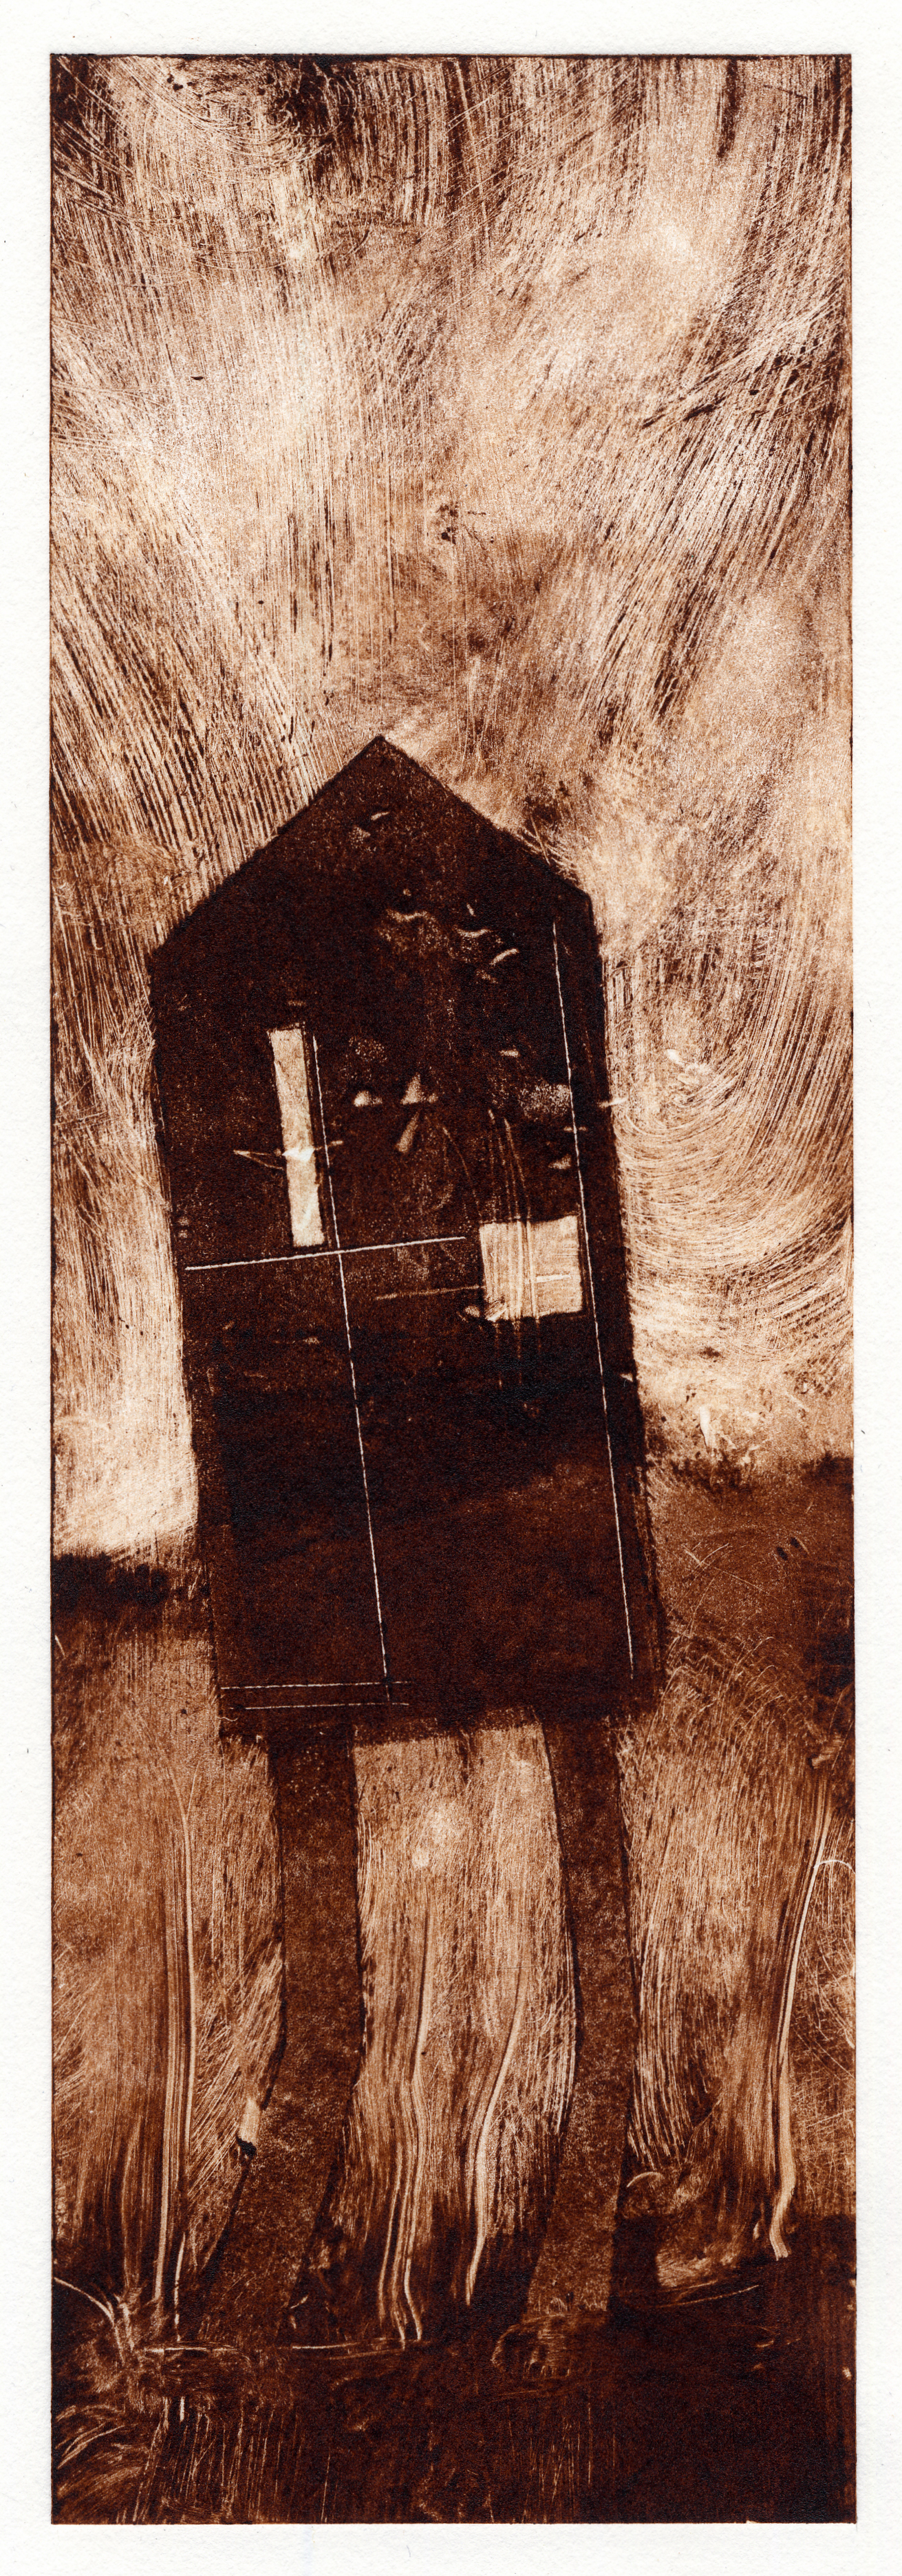  A monotype print by Clive Knights from his dwelling study in umber 